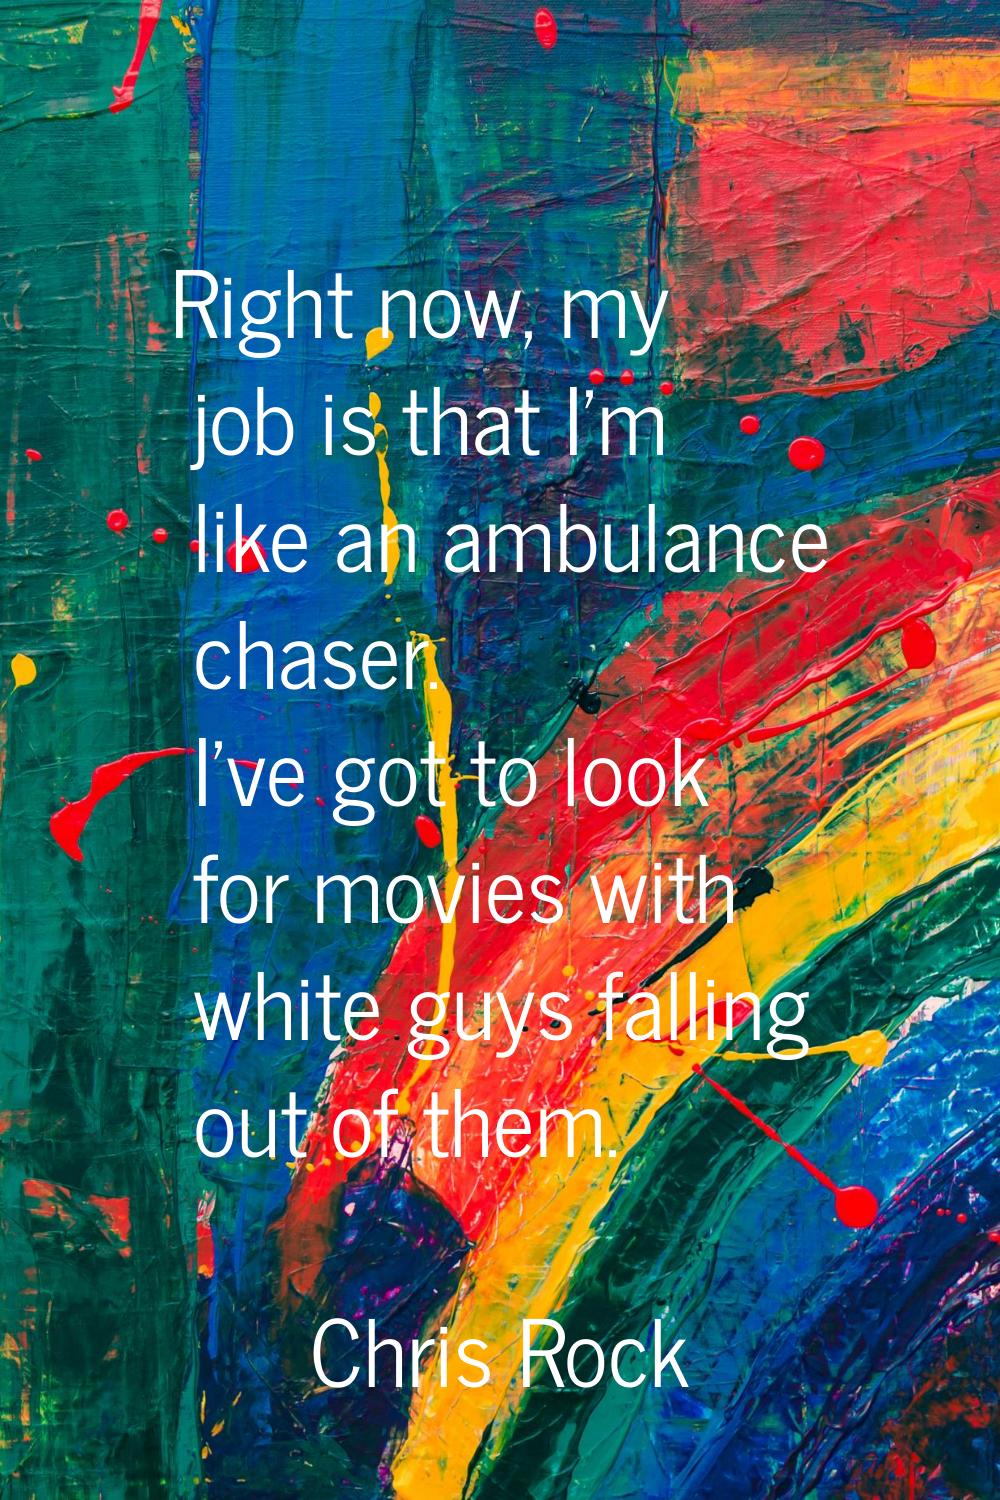 Right now, my job is that I'm like an ambulance chaser. I've got to look for movies with white guys